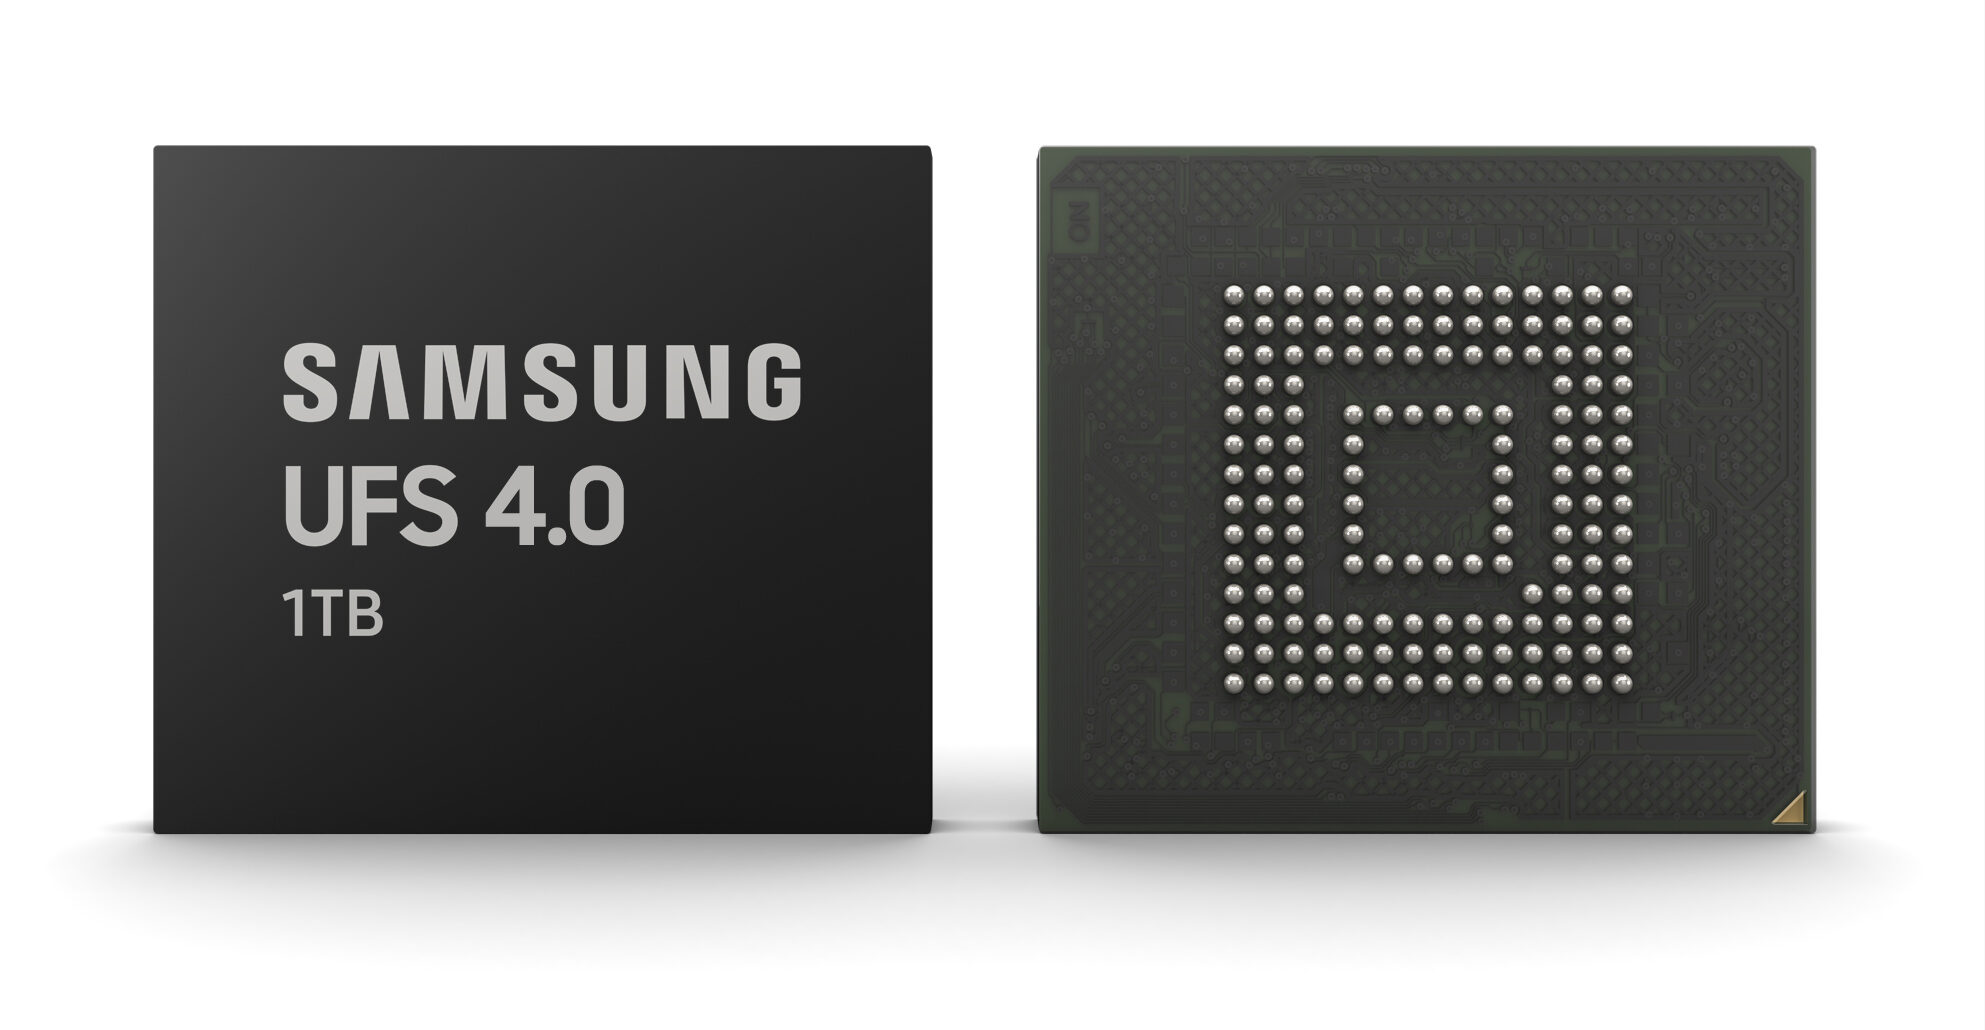 Samsung announces UFS 4.0 with 2x the performance in comparison to UFS 3.1